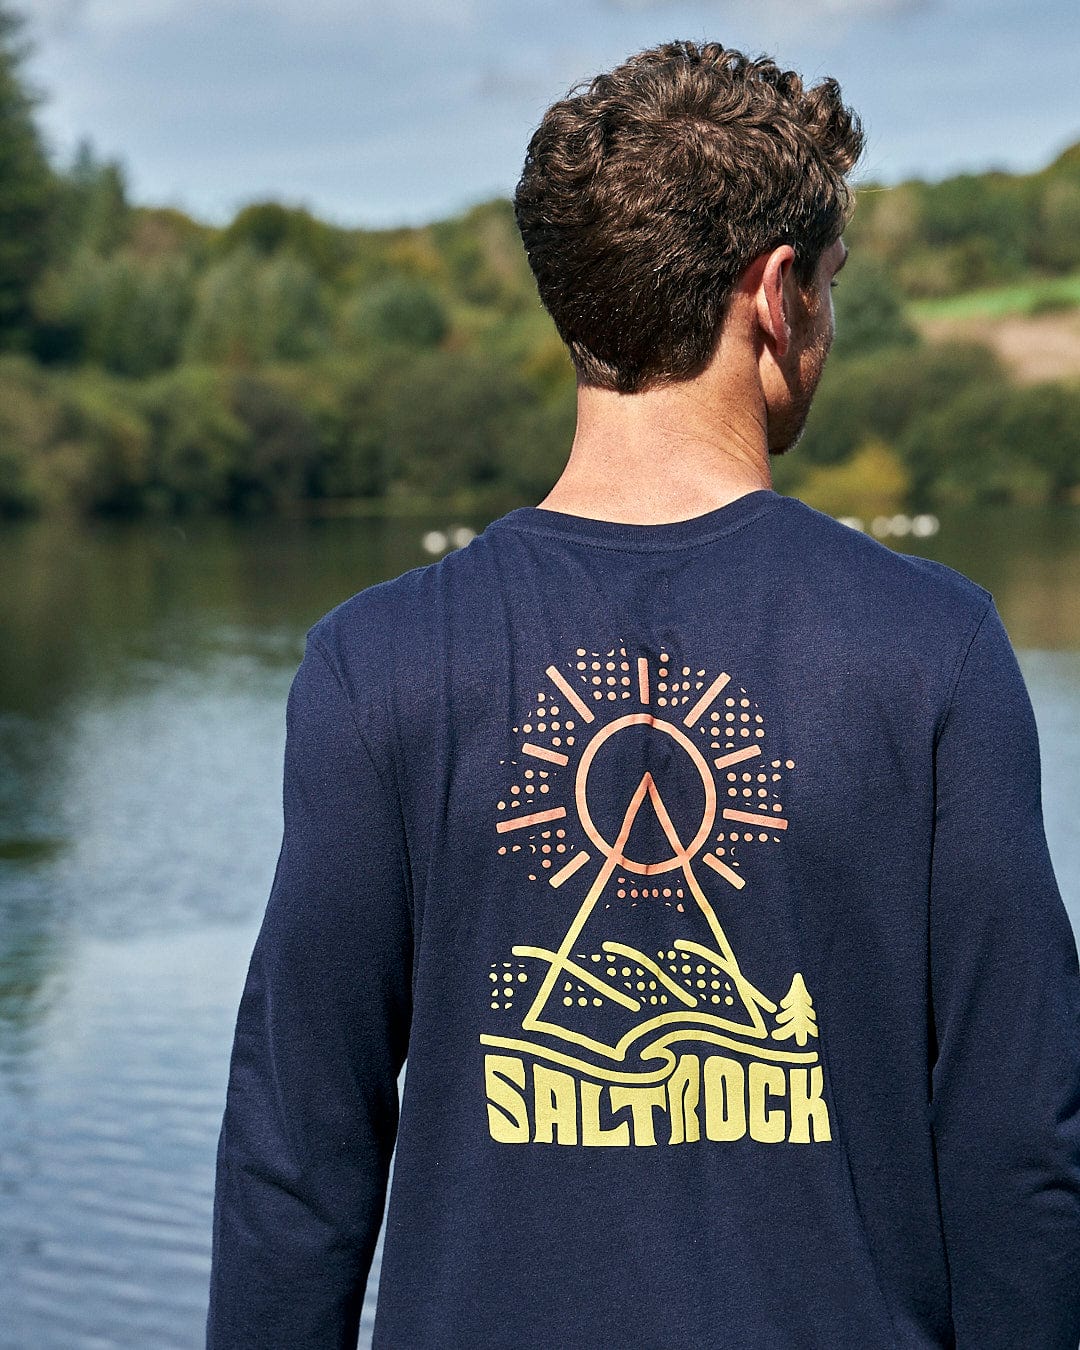 The back of a man wearing a long sleeve shirt that says Saltrock.